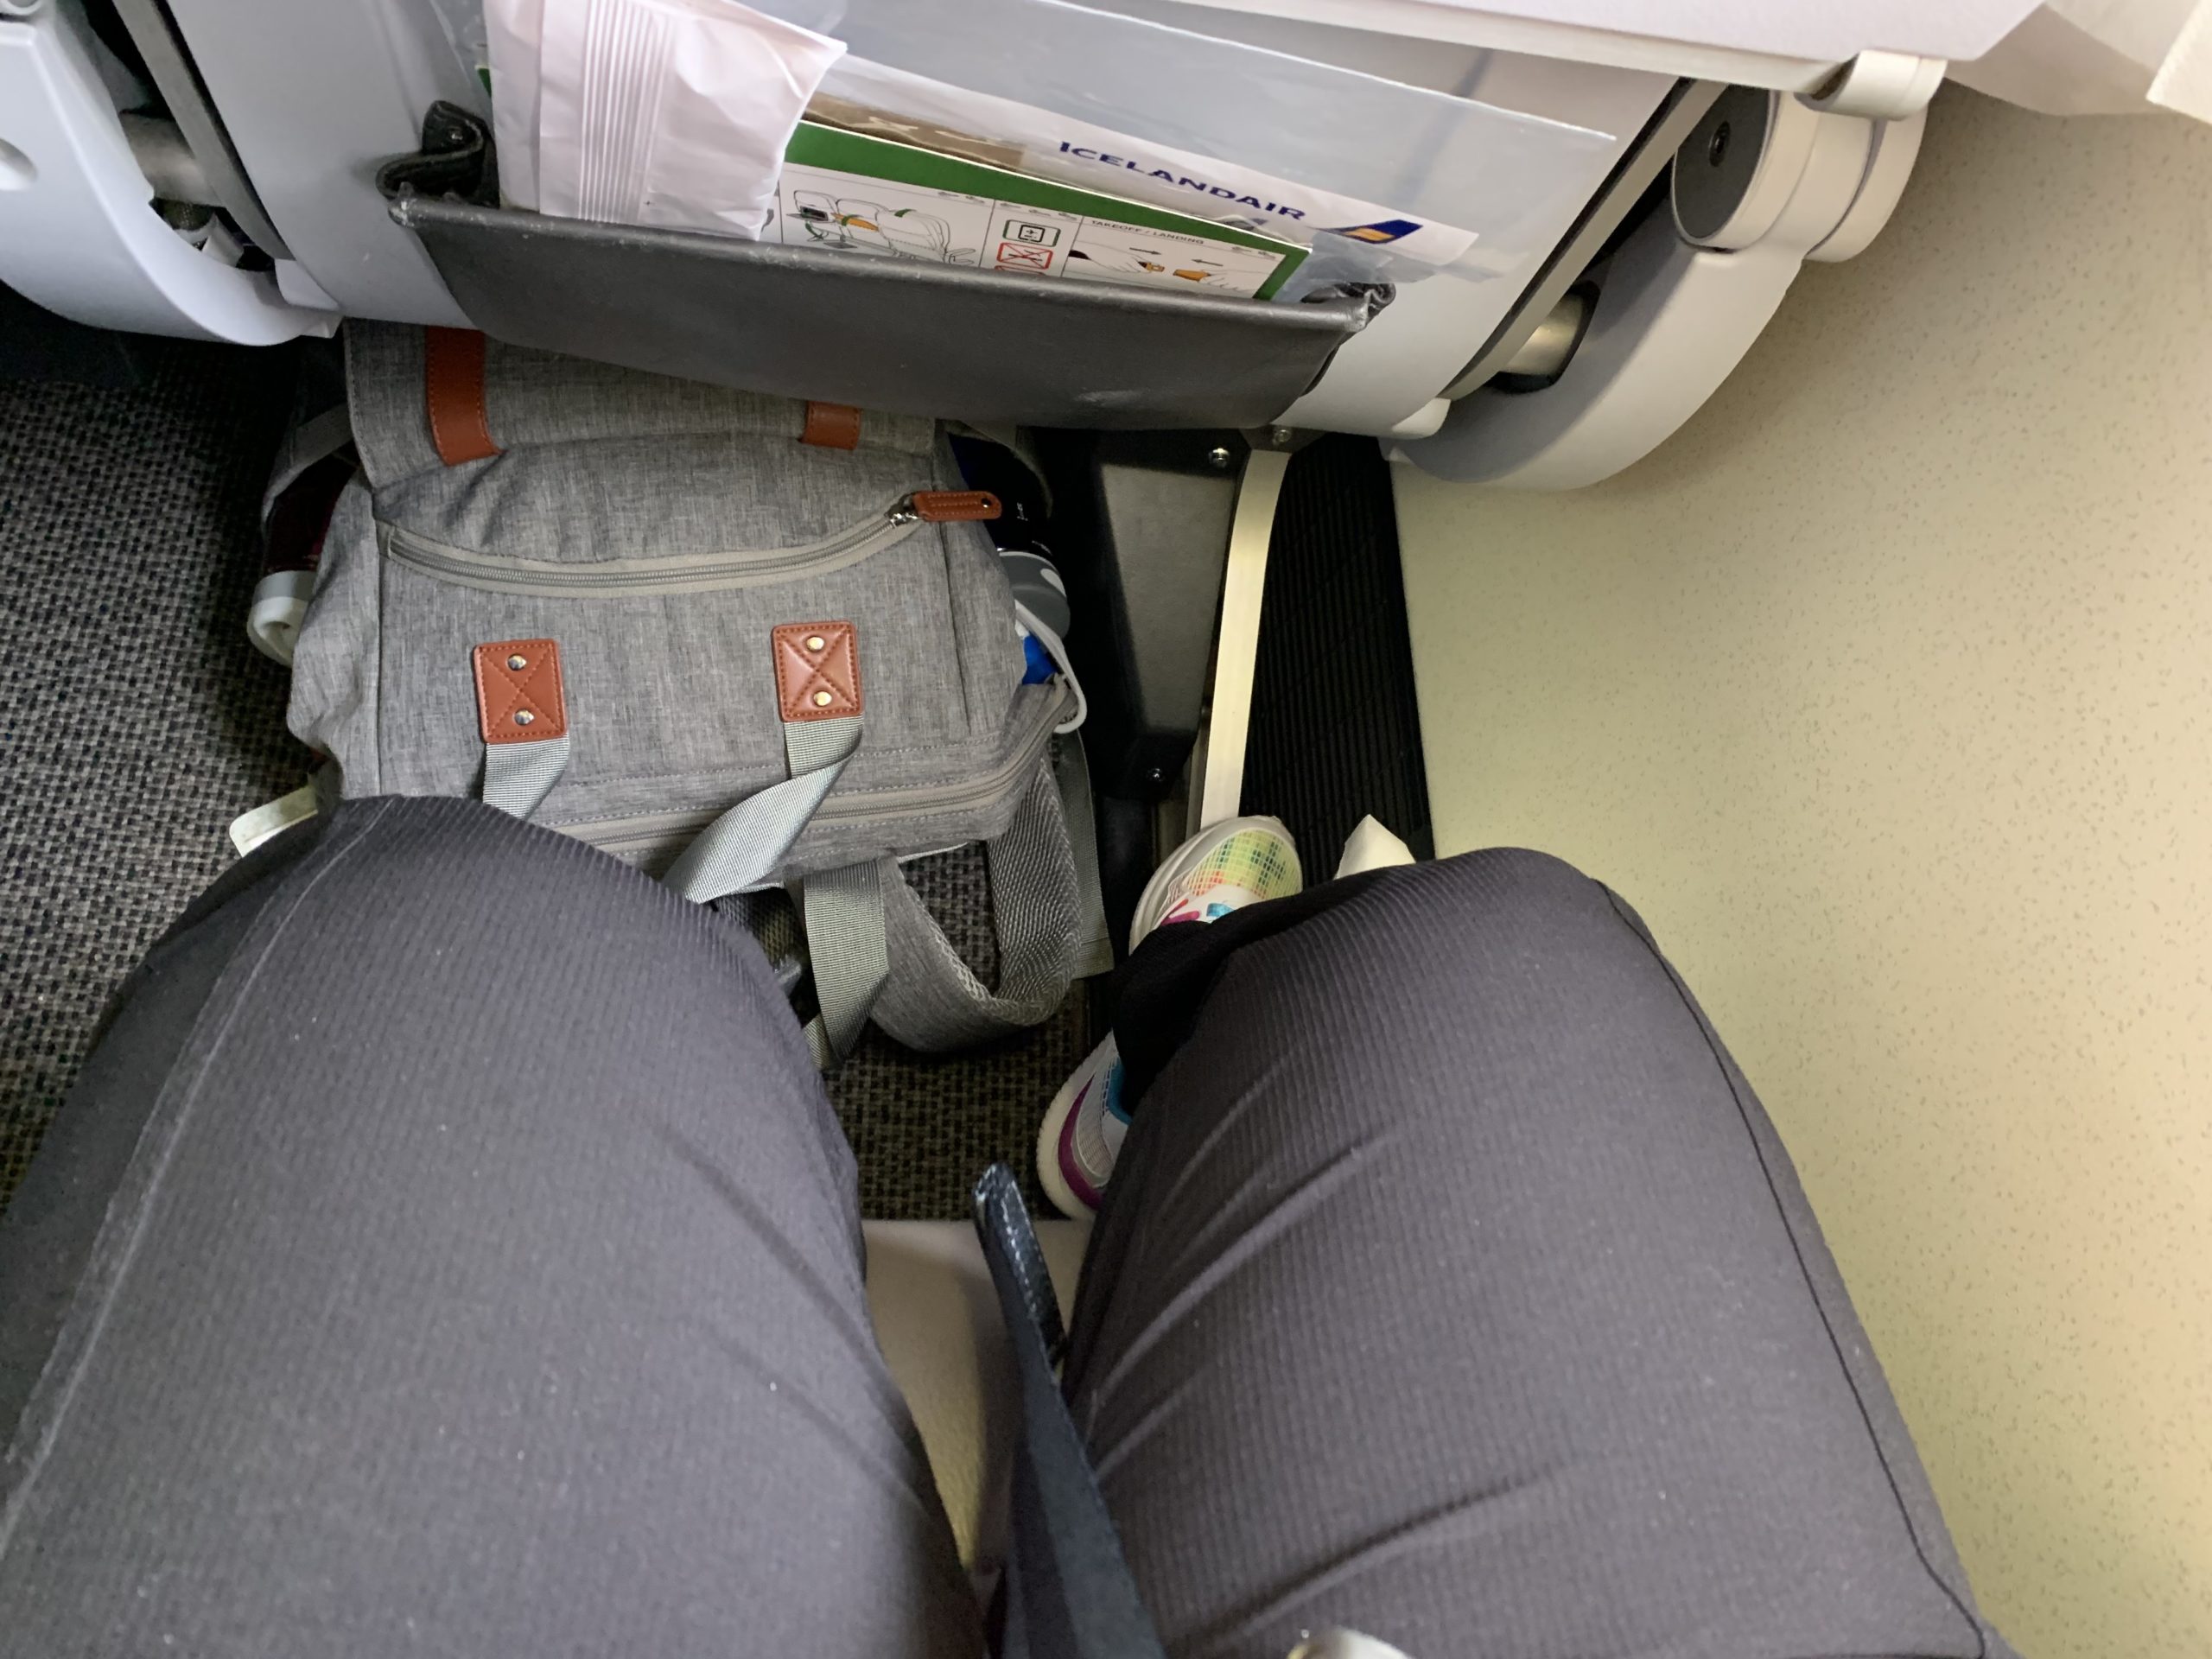 a person's legs and a backpack in an airplane